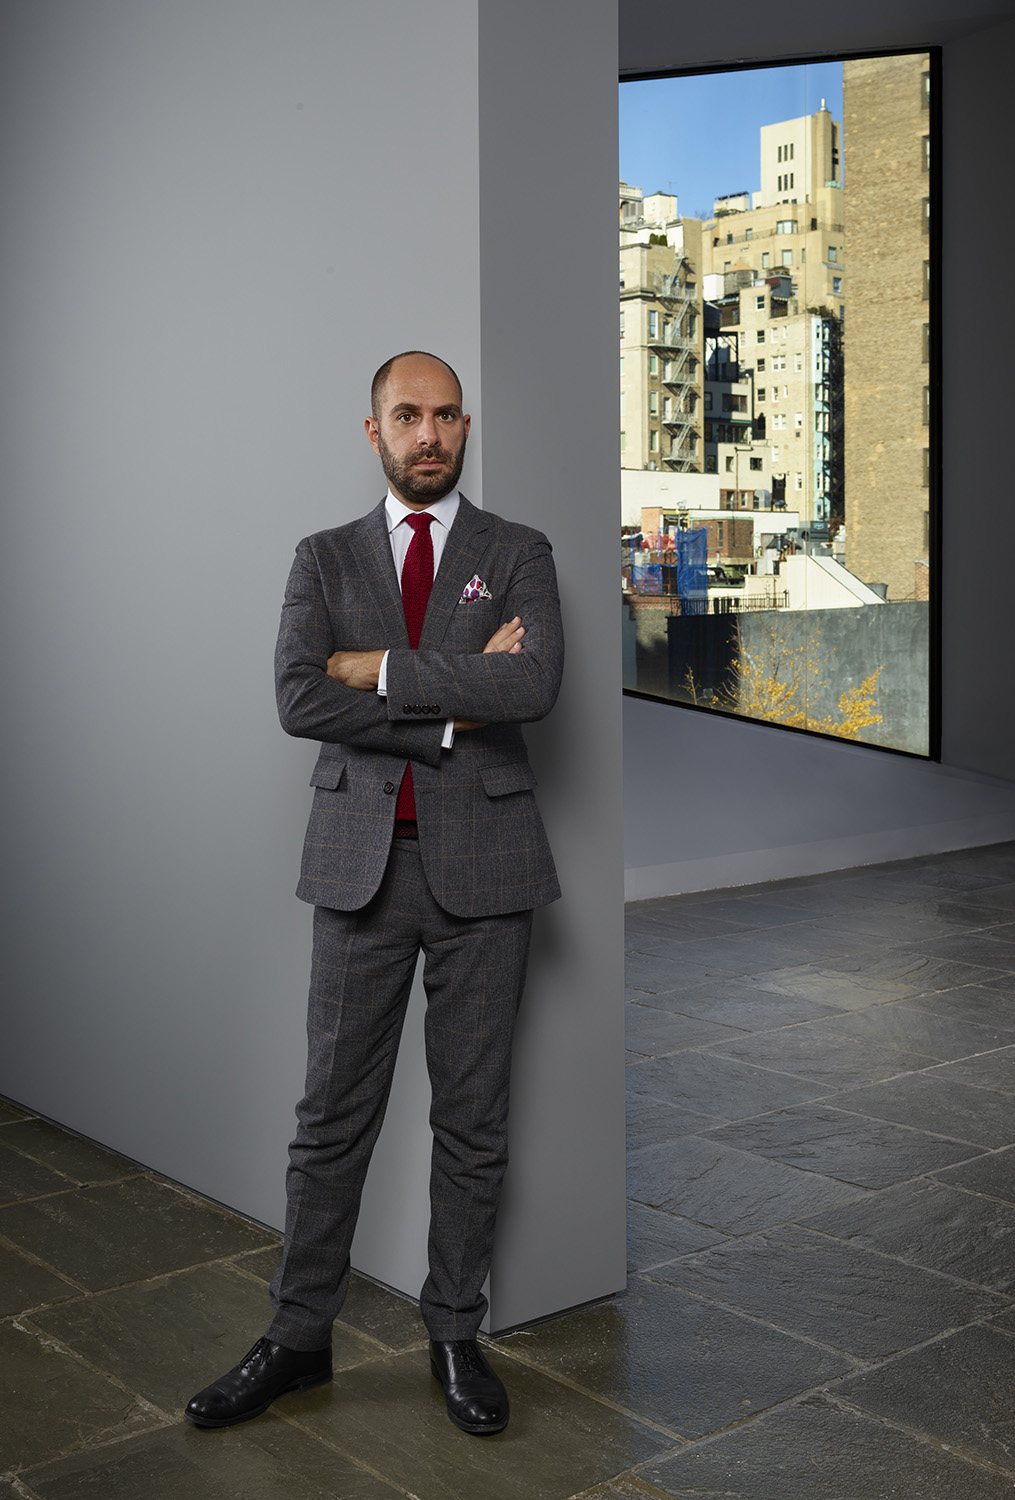 Frick Madison: Xavier F. Salomon Discusses the Transformation from Mansion to Bauhaus